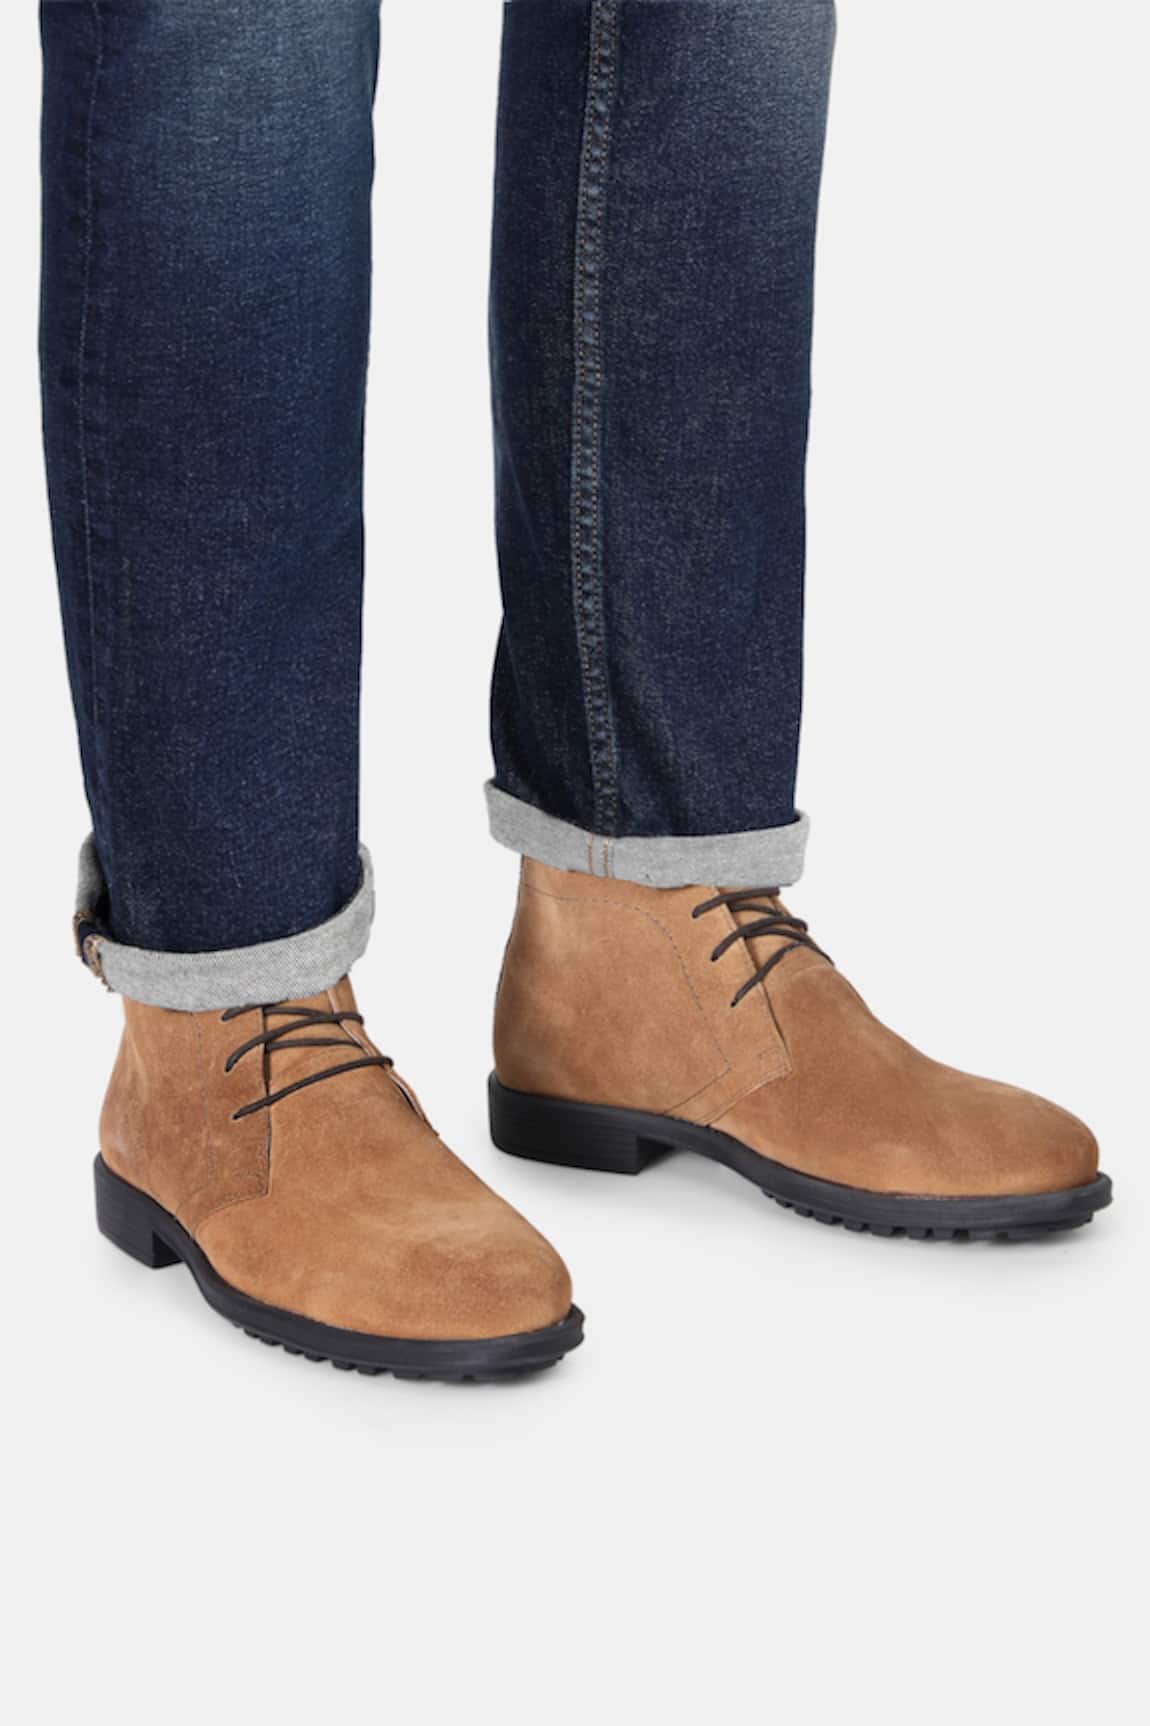 Hats Off Accessories Leather Chukka Boots